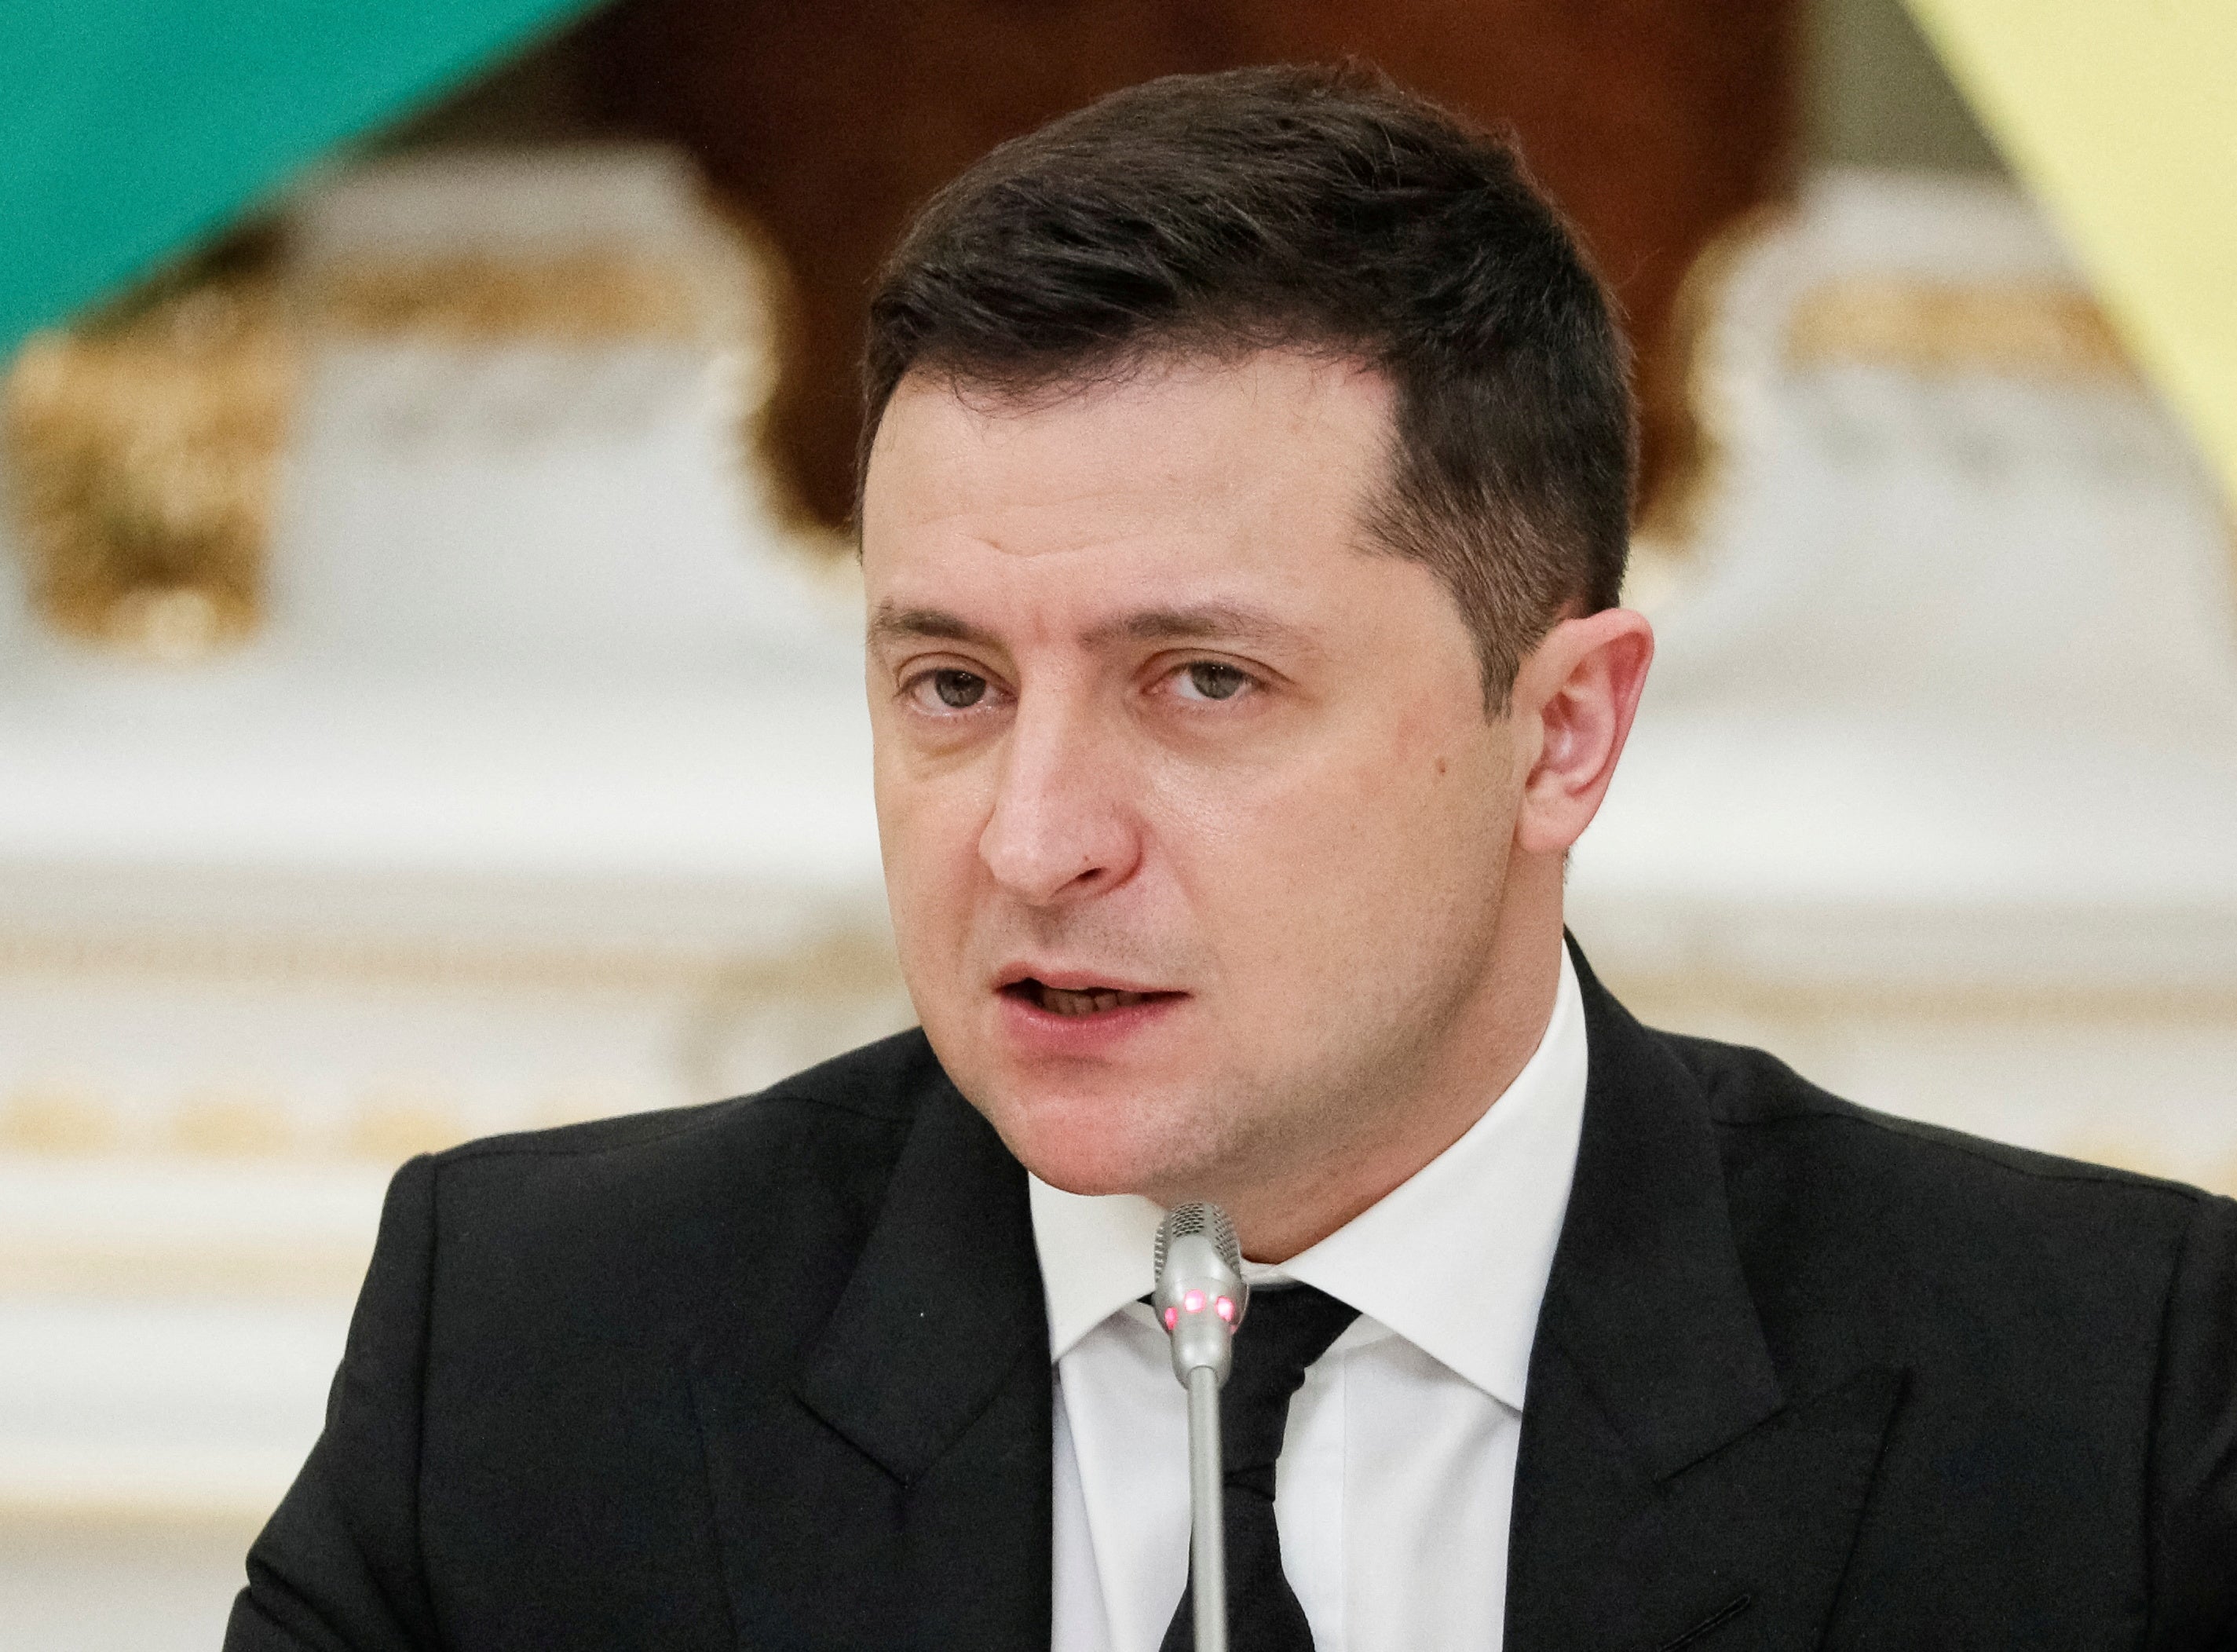 In all the hue and cry about an existential threat to Ukraine from Russia, Zelenskiy is almost the only national leader who has kept a cool head